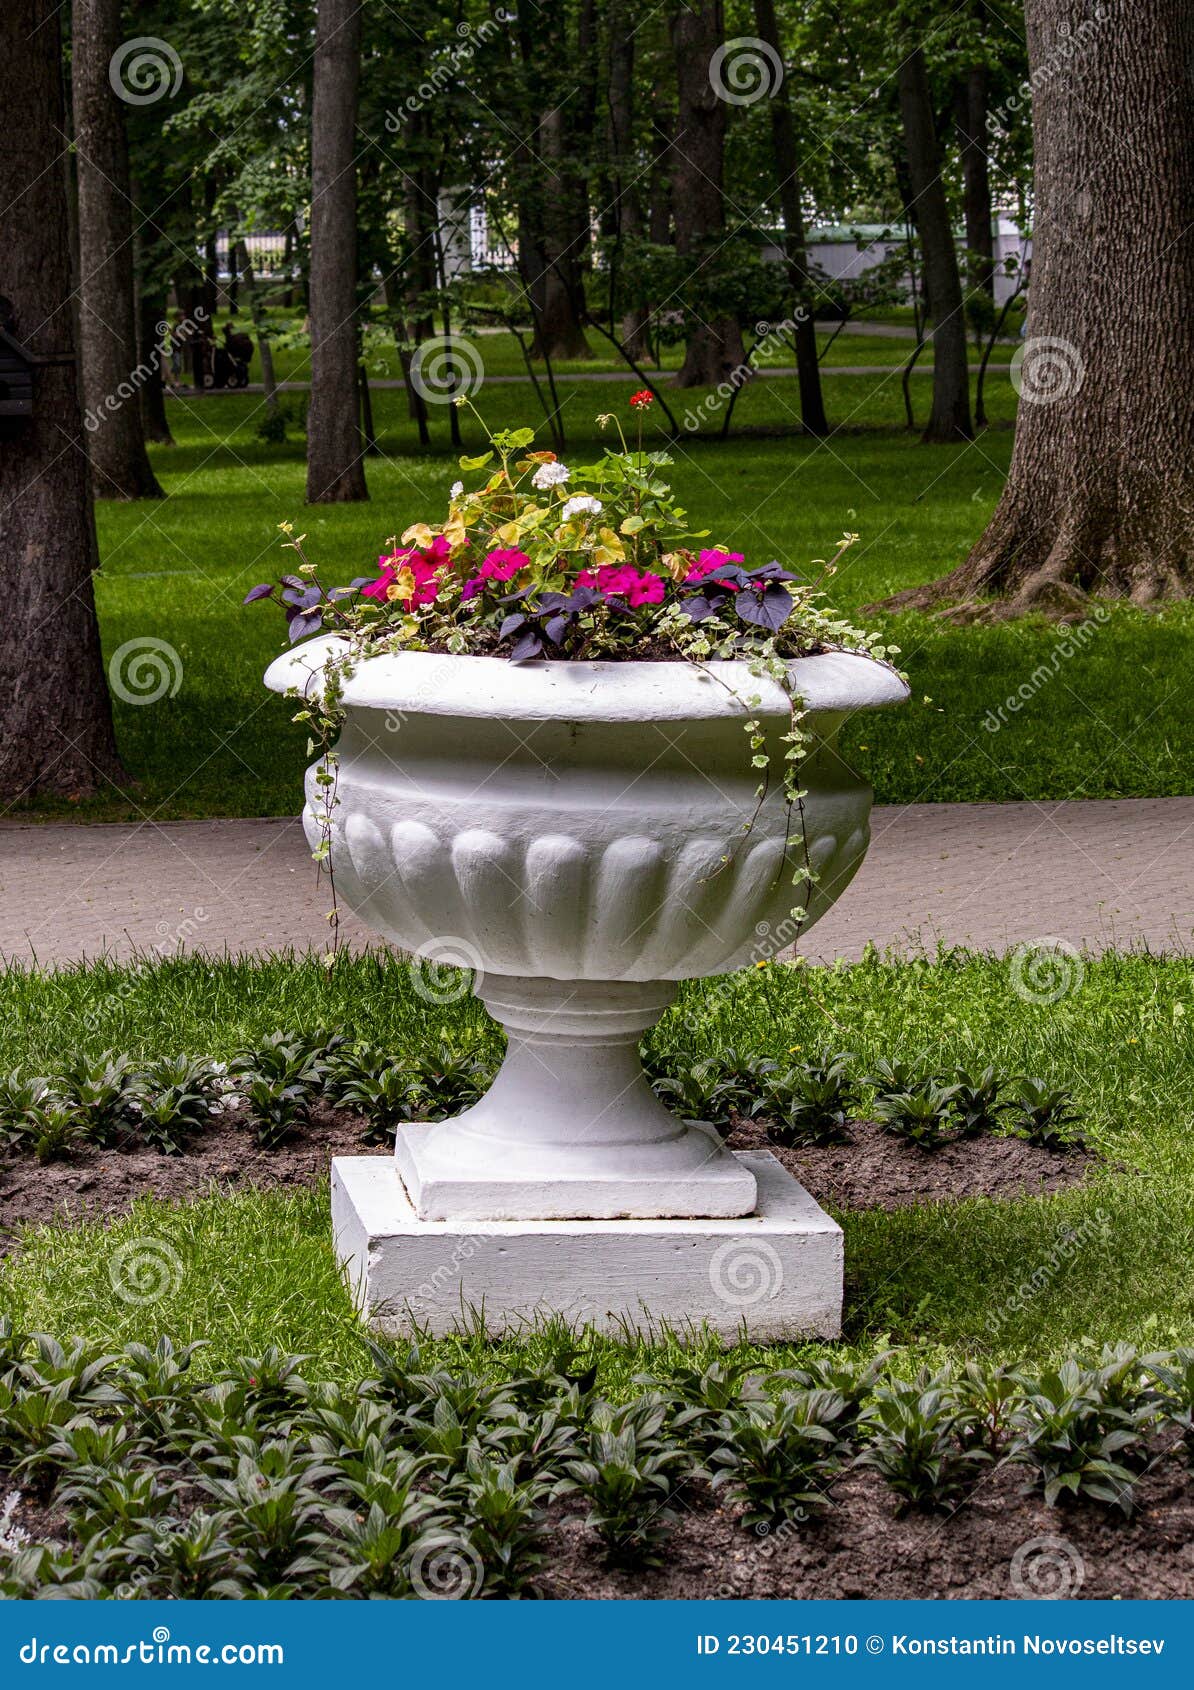 the flowerpot with flowers in the park